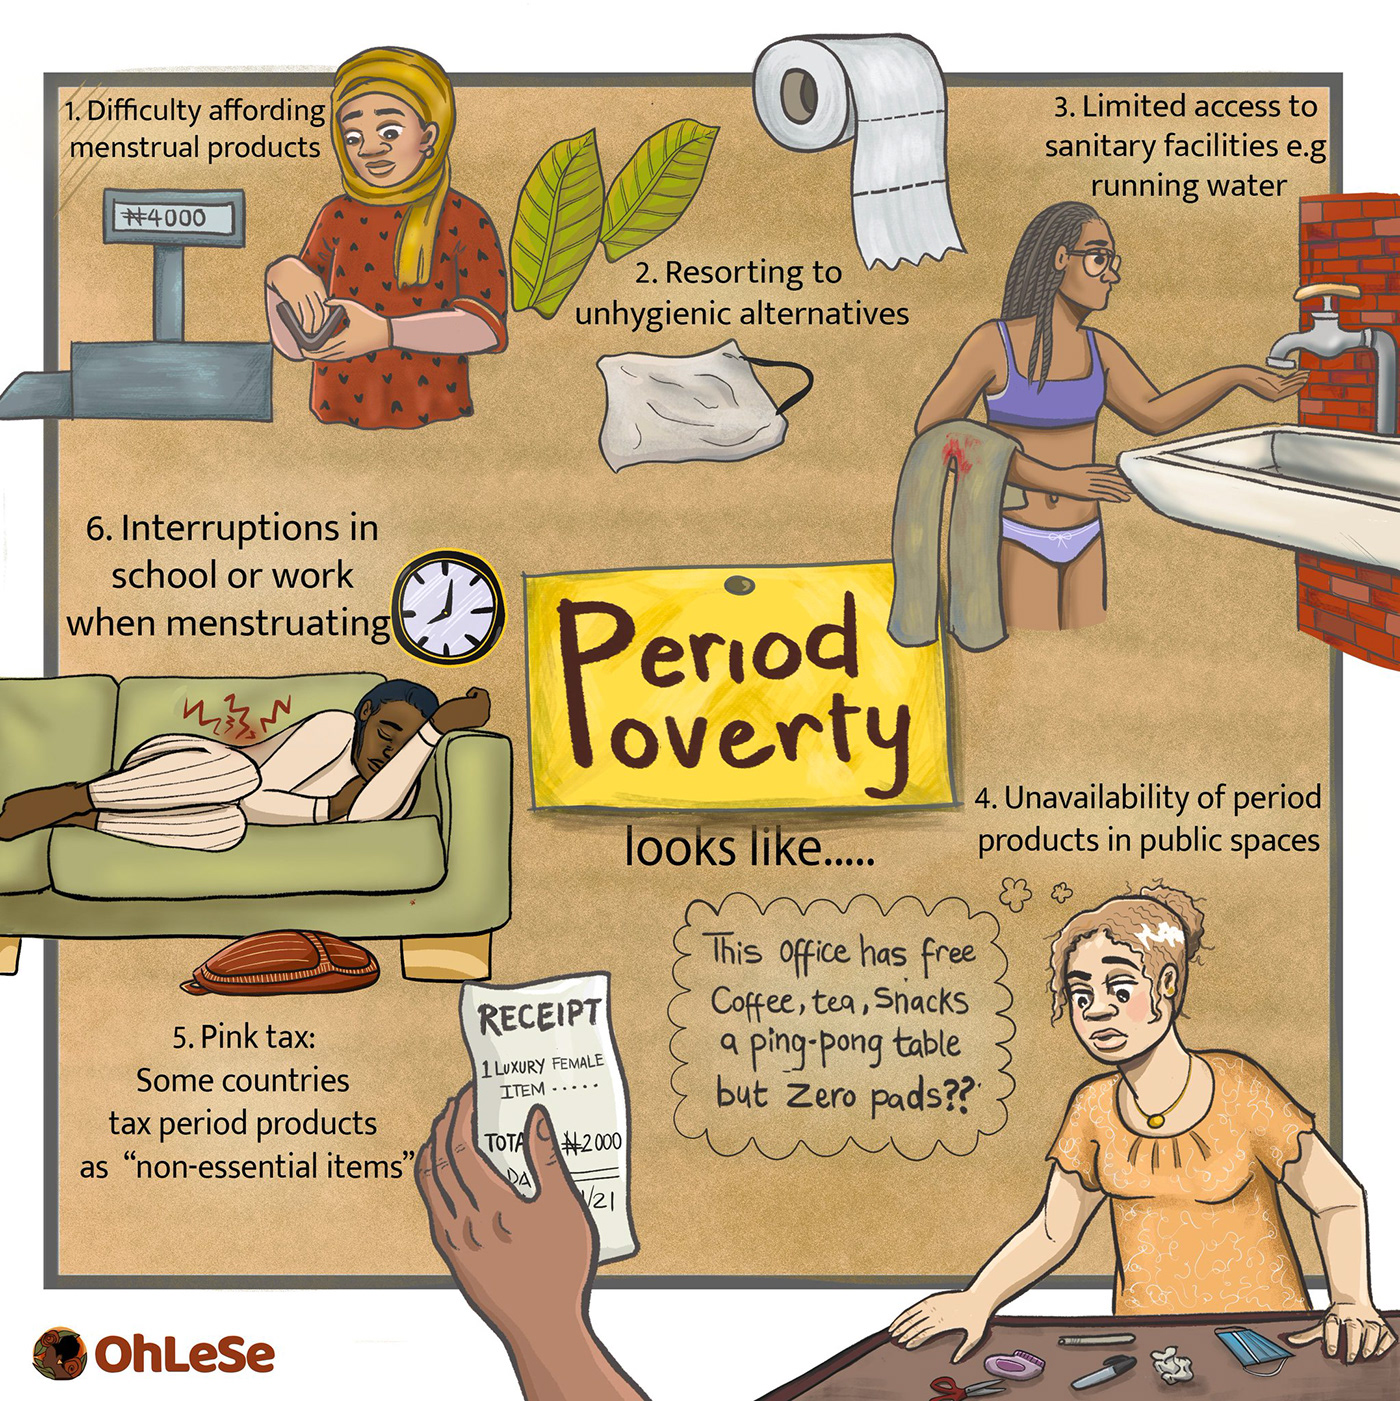 feminist illustration infographic Menstrual Health period poverty pink tax